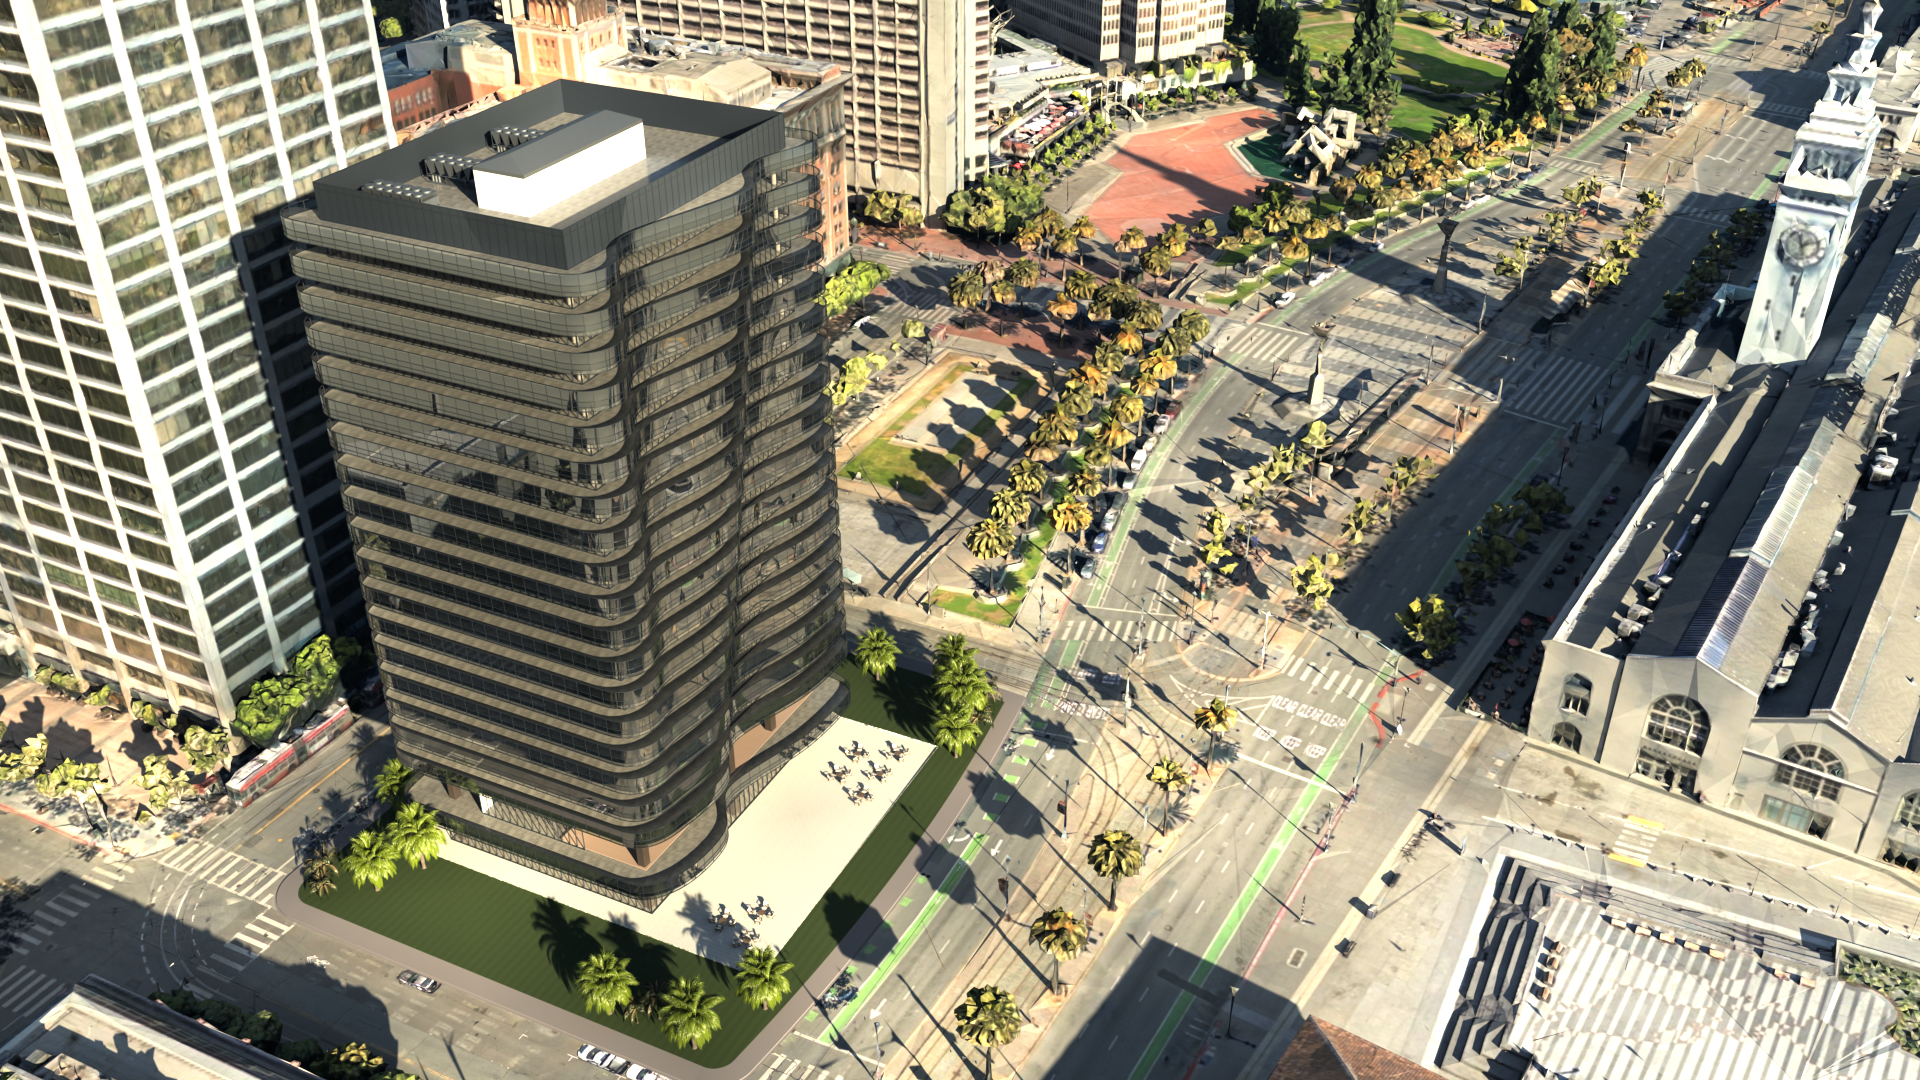 3D render of an office building in San Francisco that can be modified as part of the demo pack.